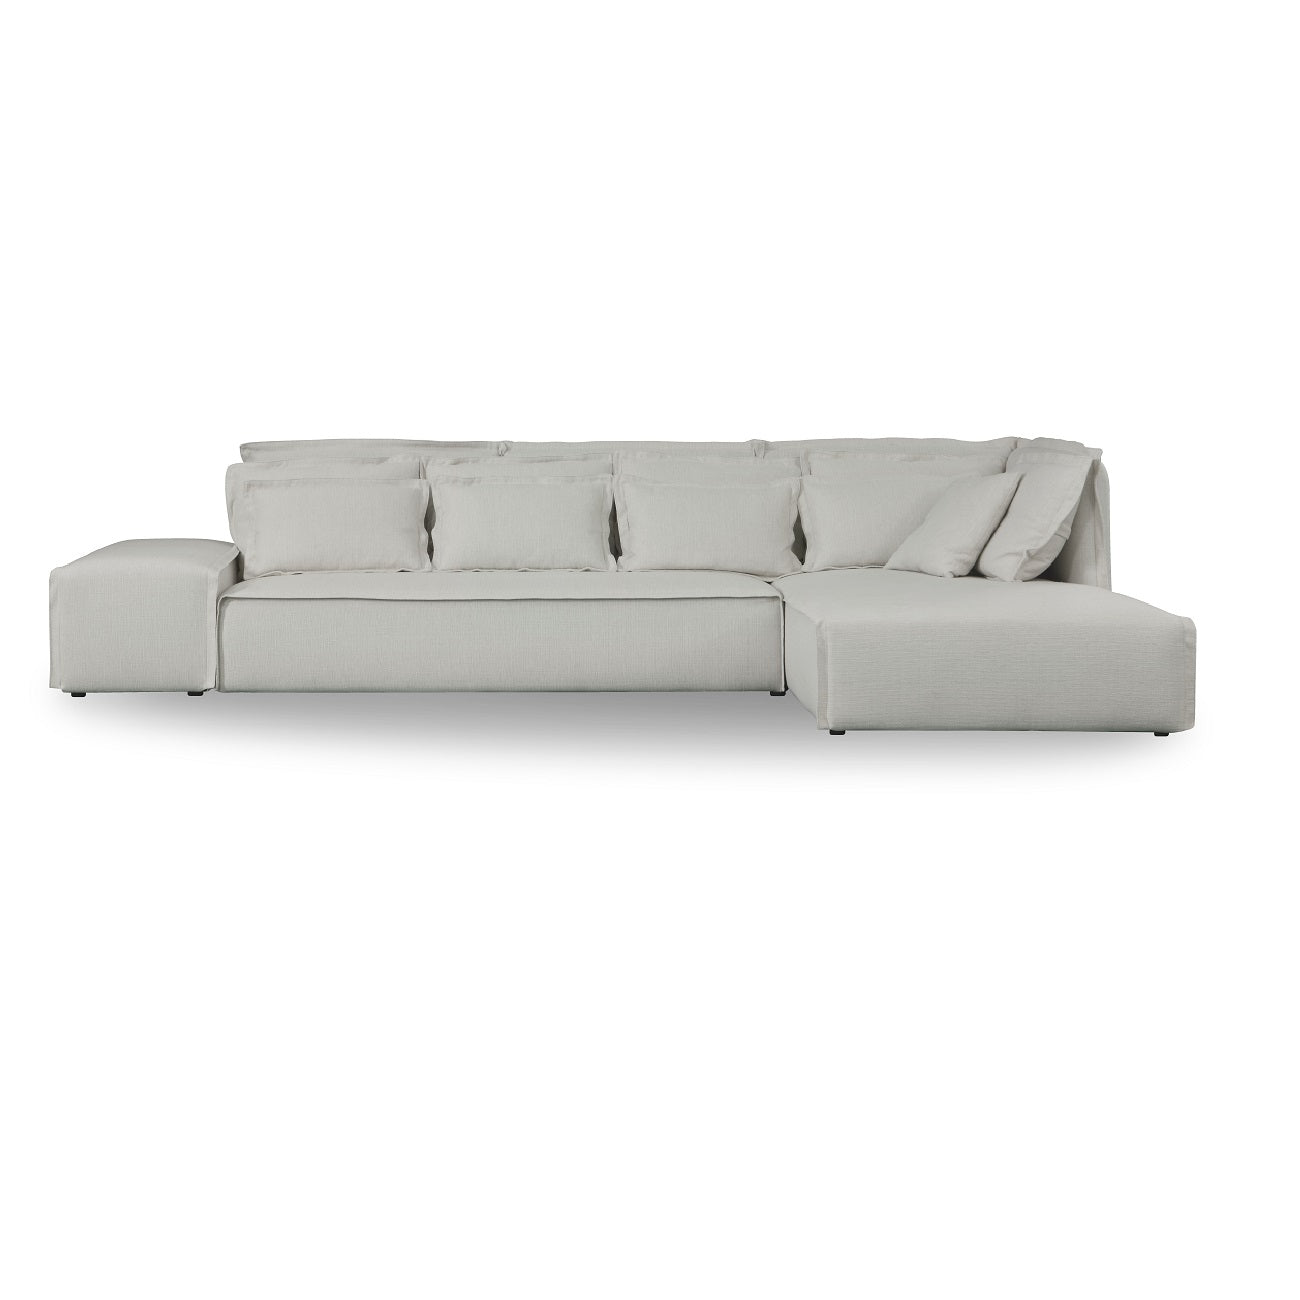 Gioia Chaise Sectional - Furniture.Agency